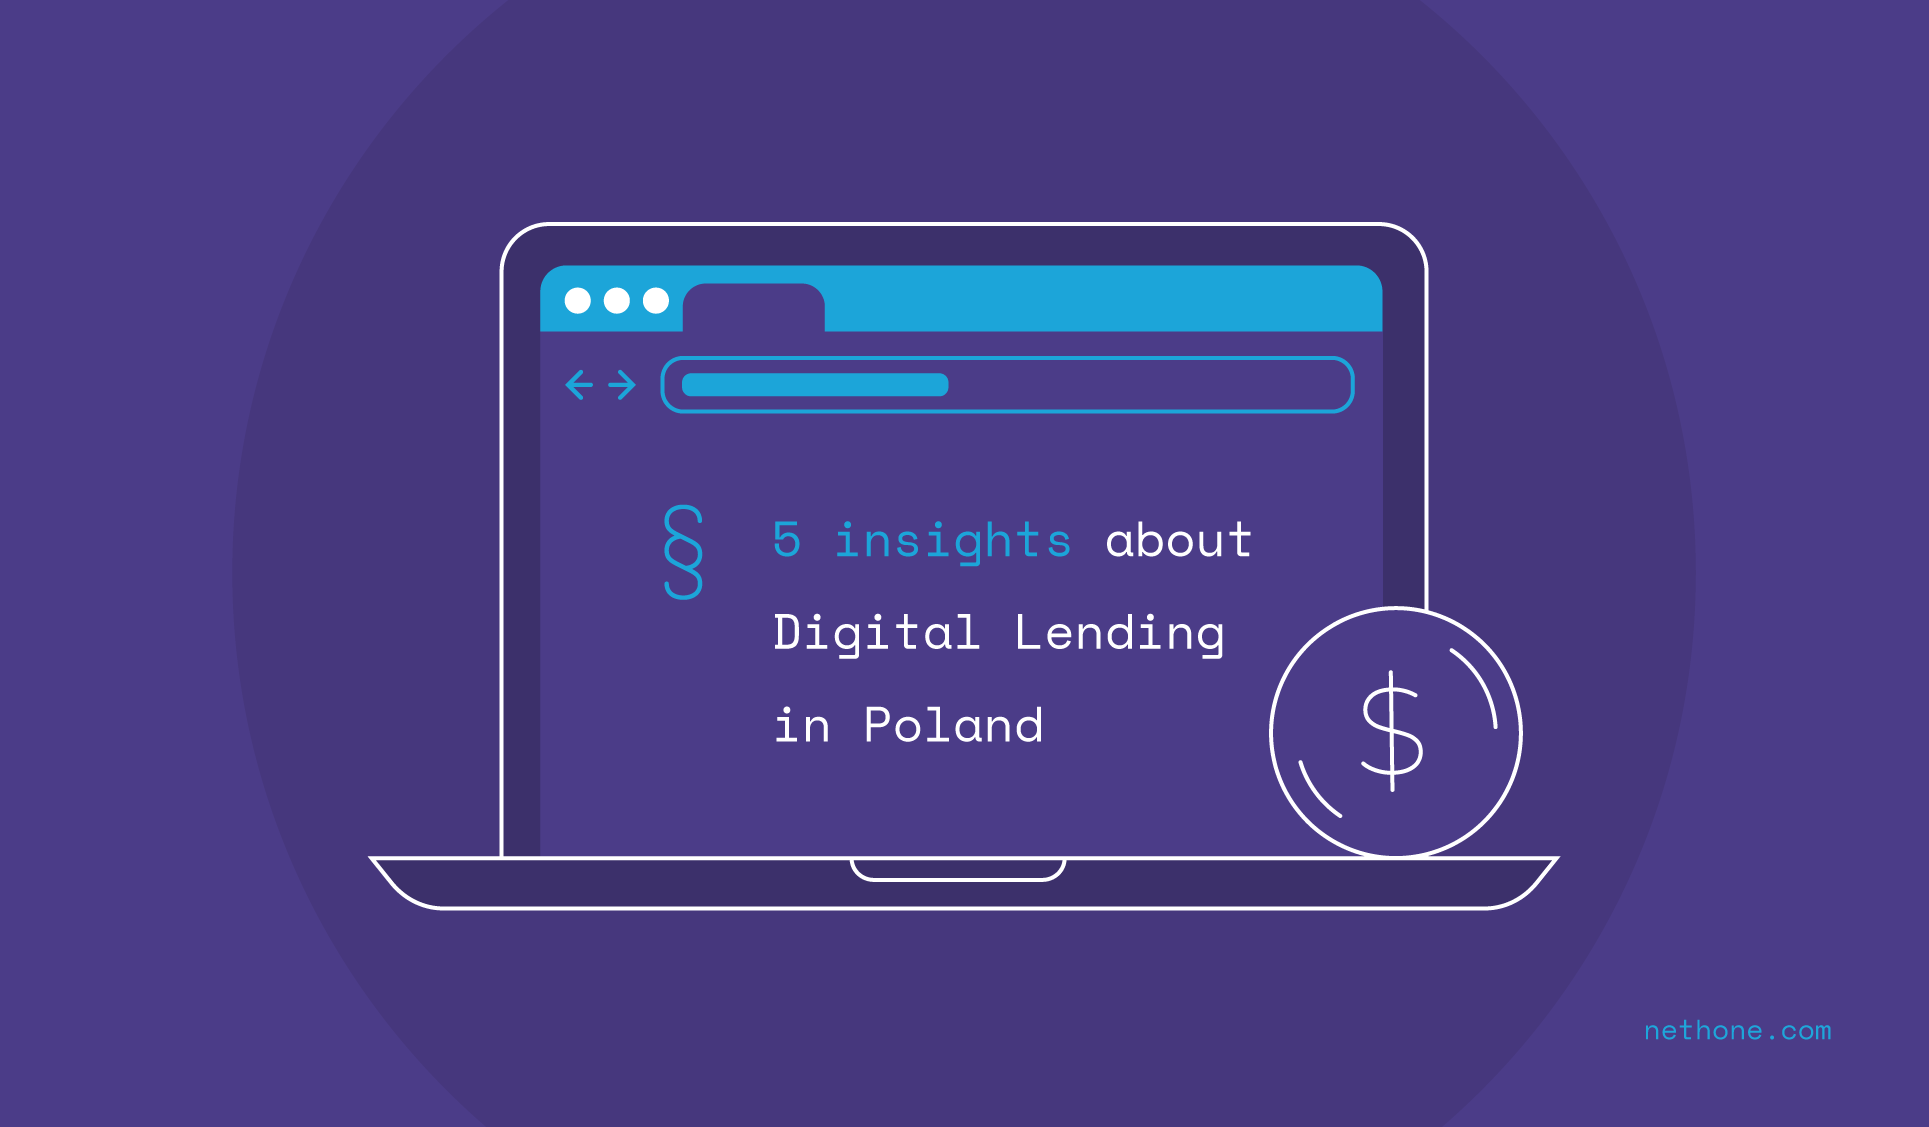 5 questions about Digital Lending in Poland